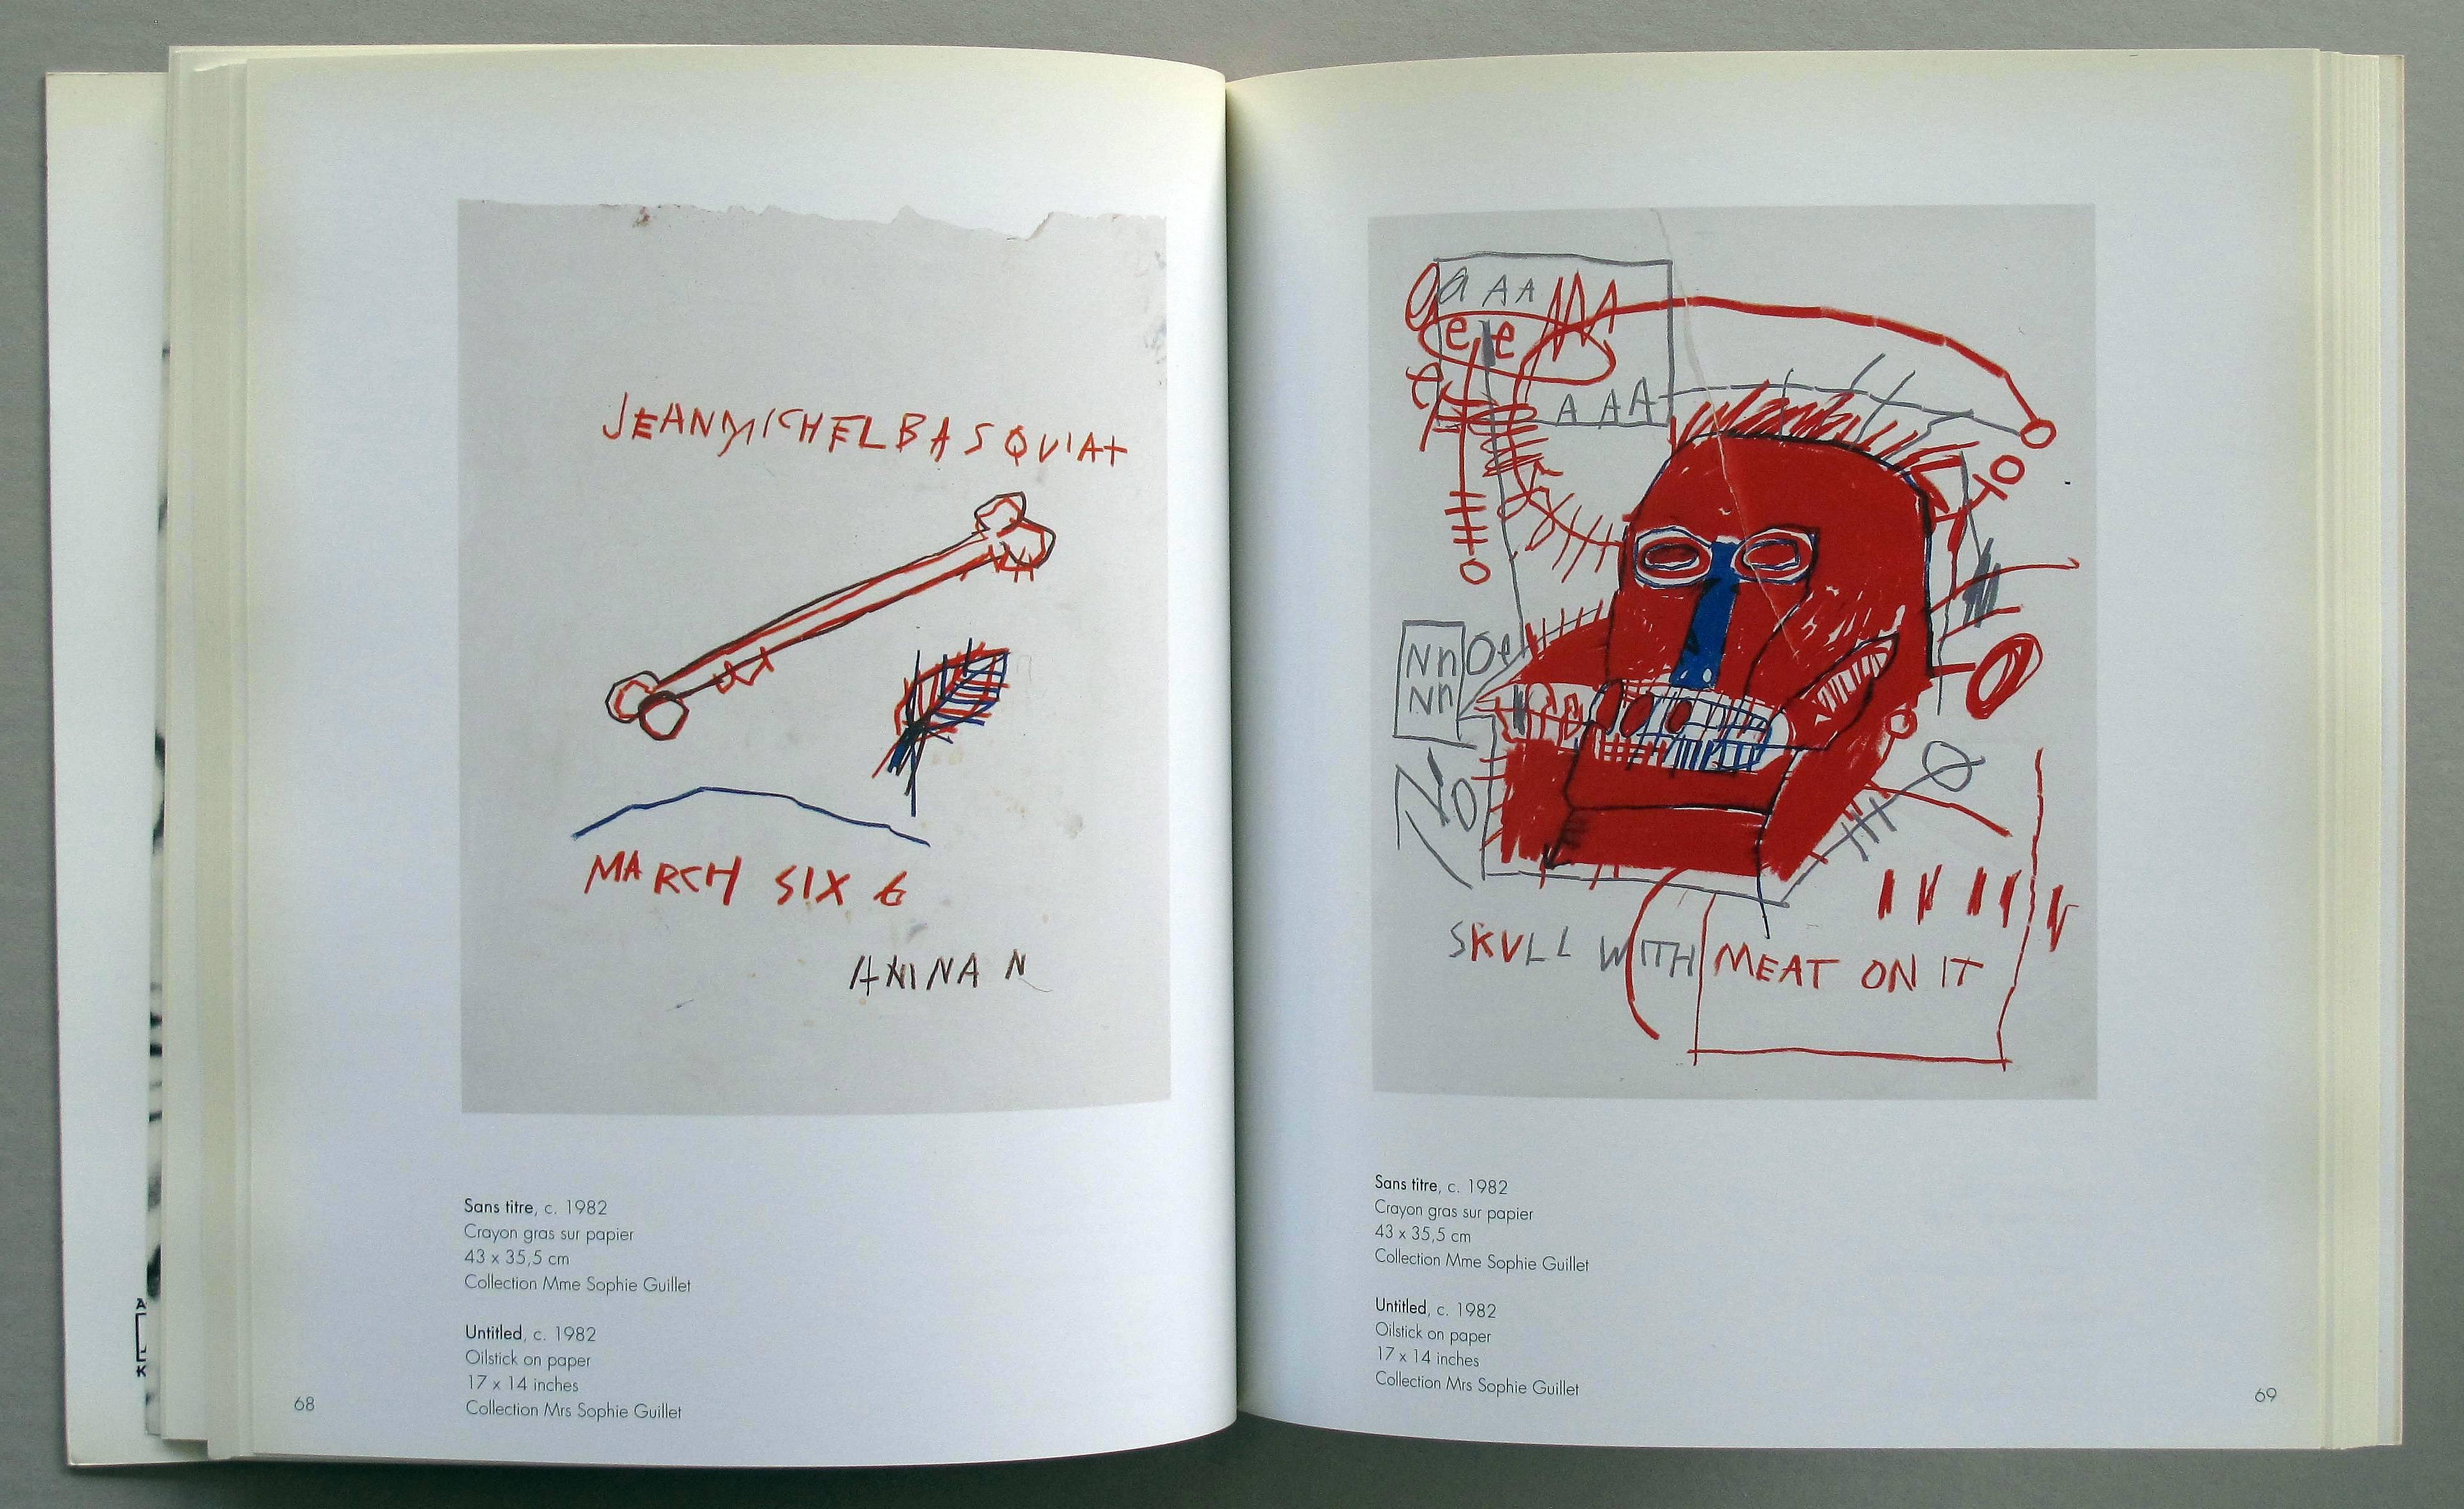 Basquiat Réunion des Musées Nationaux exhibition catalog, 1997:

A superbly composed & elaborate catalog of Basquiat drawings and works on paper published in 1997 by Réunion des Musées Nationaux, France. Features 85 beautifully illustrated color